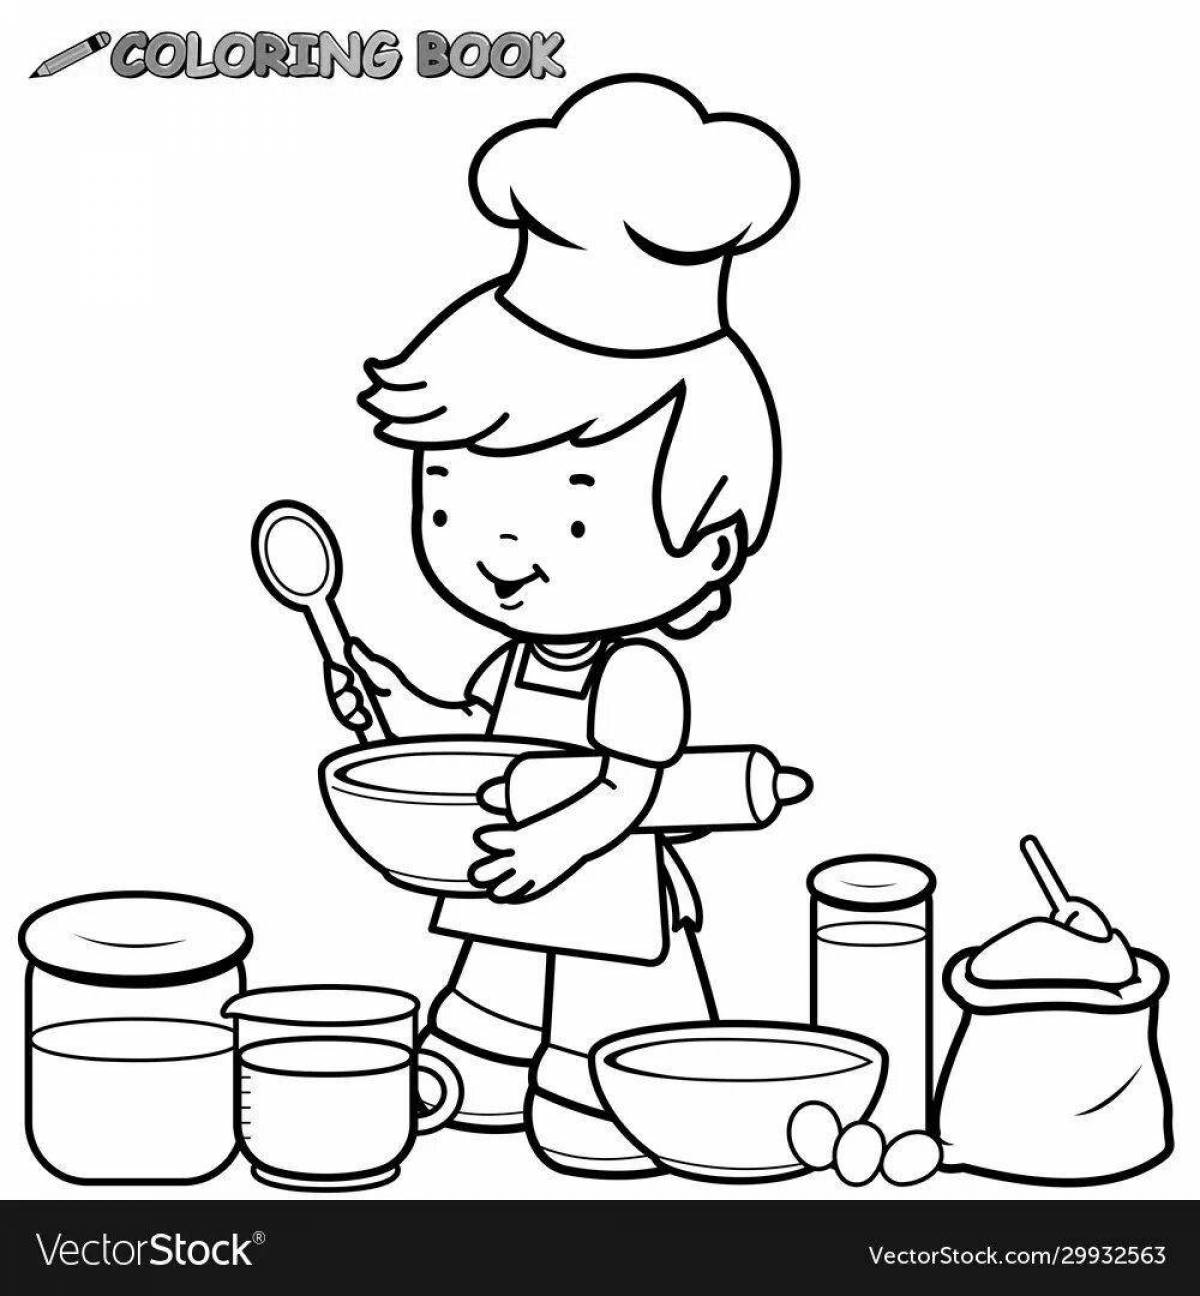 Colour-loving cooks coloring pages for kindergarten